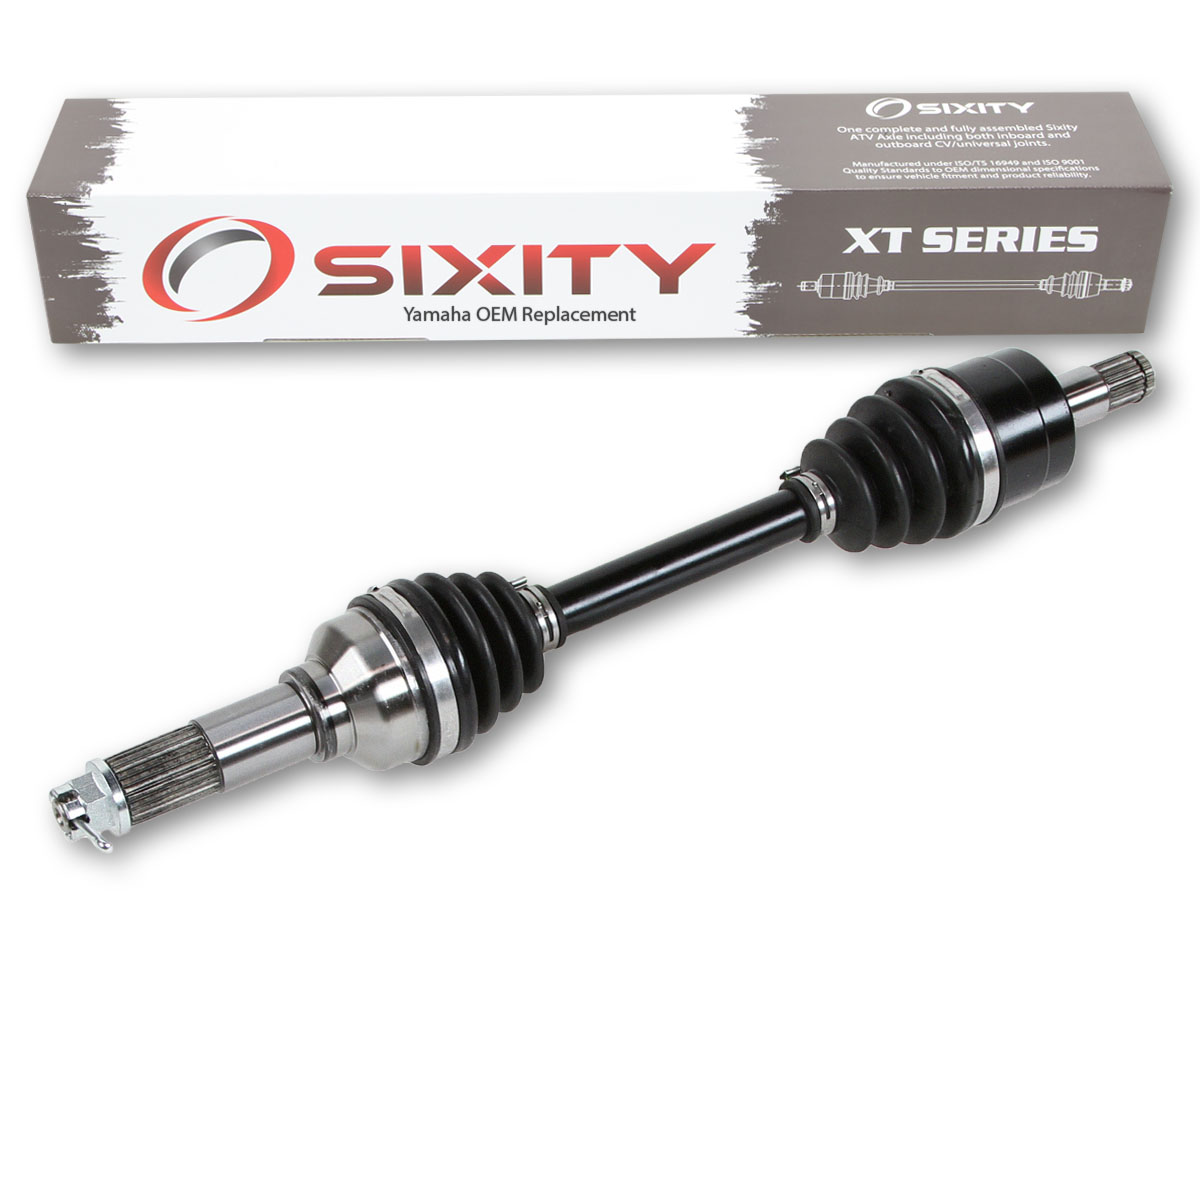 Sixity Yamaha 5GH-2510F-00-00 5GH-2510J-00-00 XT OEM Axle - Replacement Front Rear Left Right Side Back